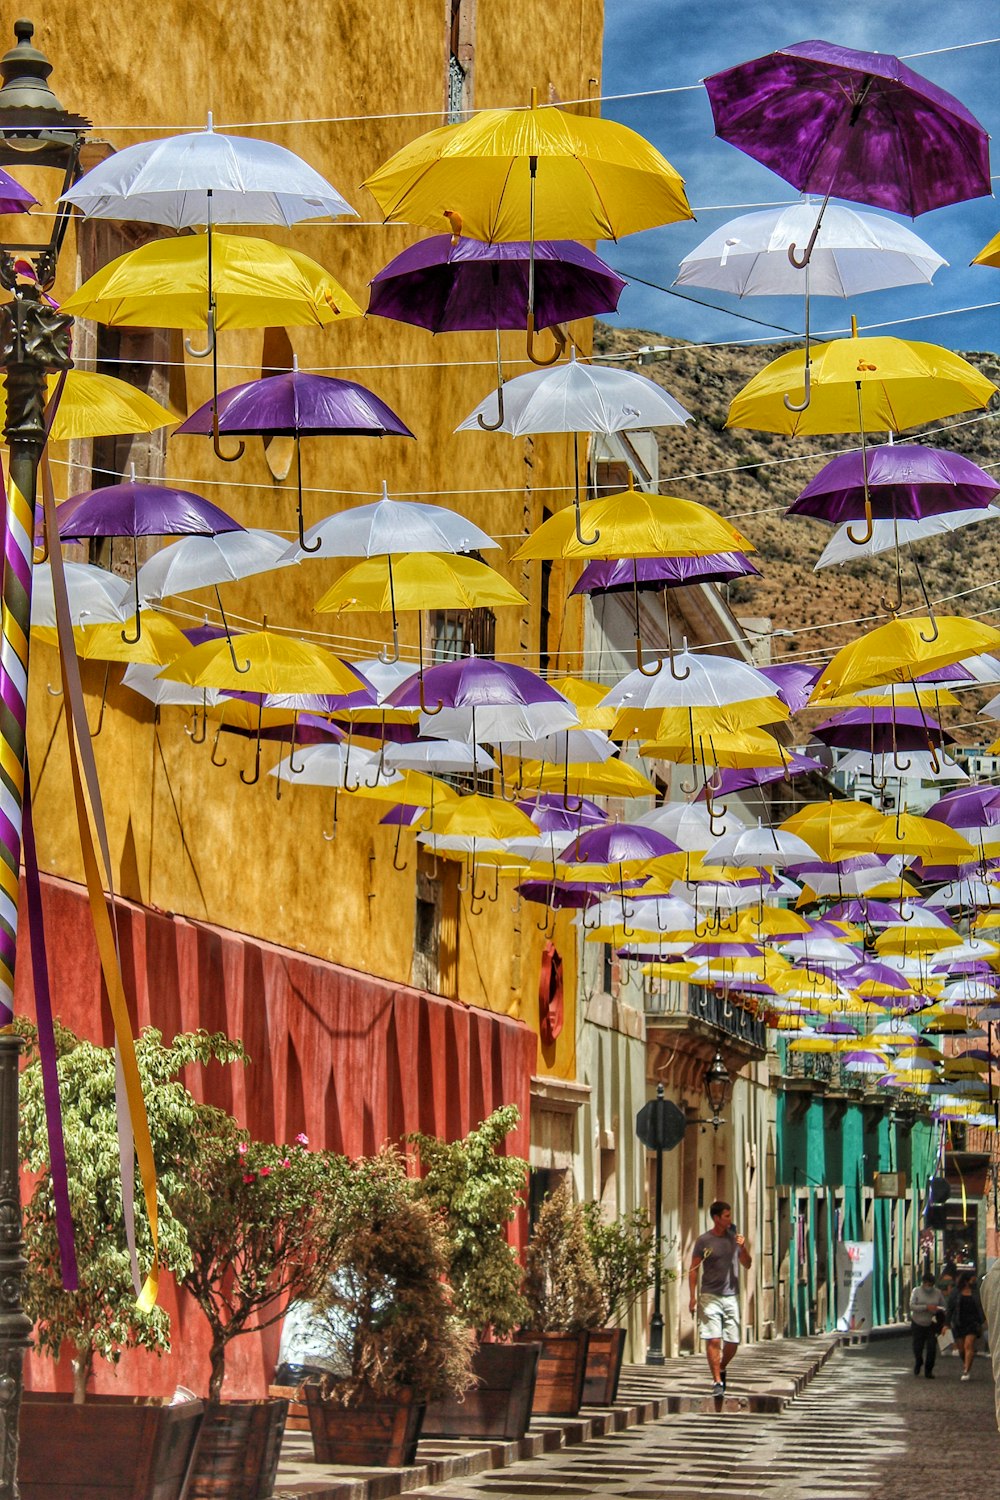 assorted umbrellas hanged on brown wooden fence during daytime